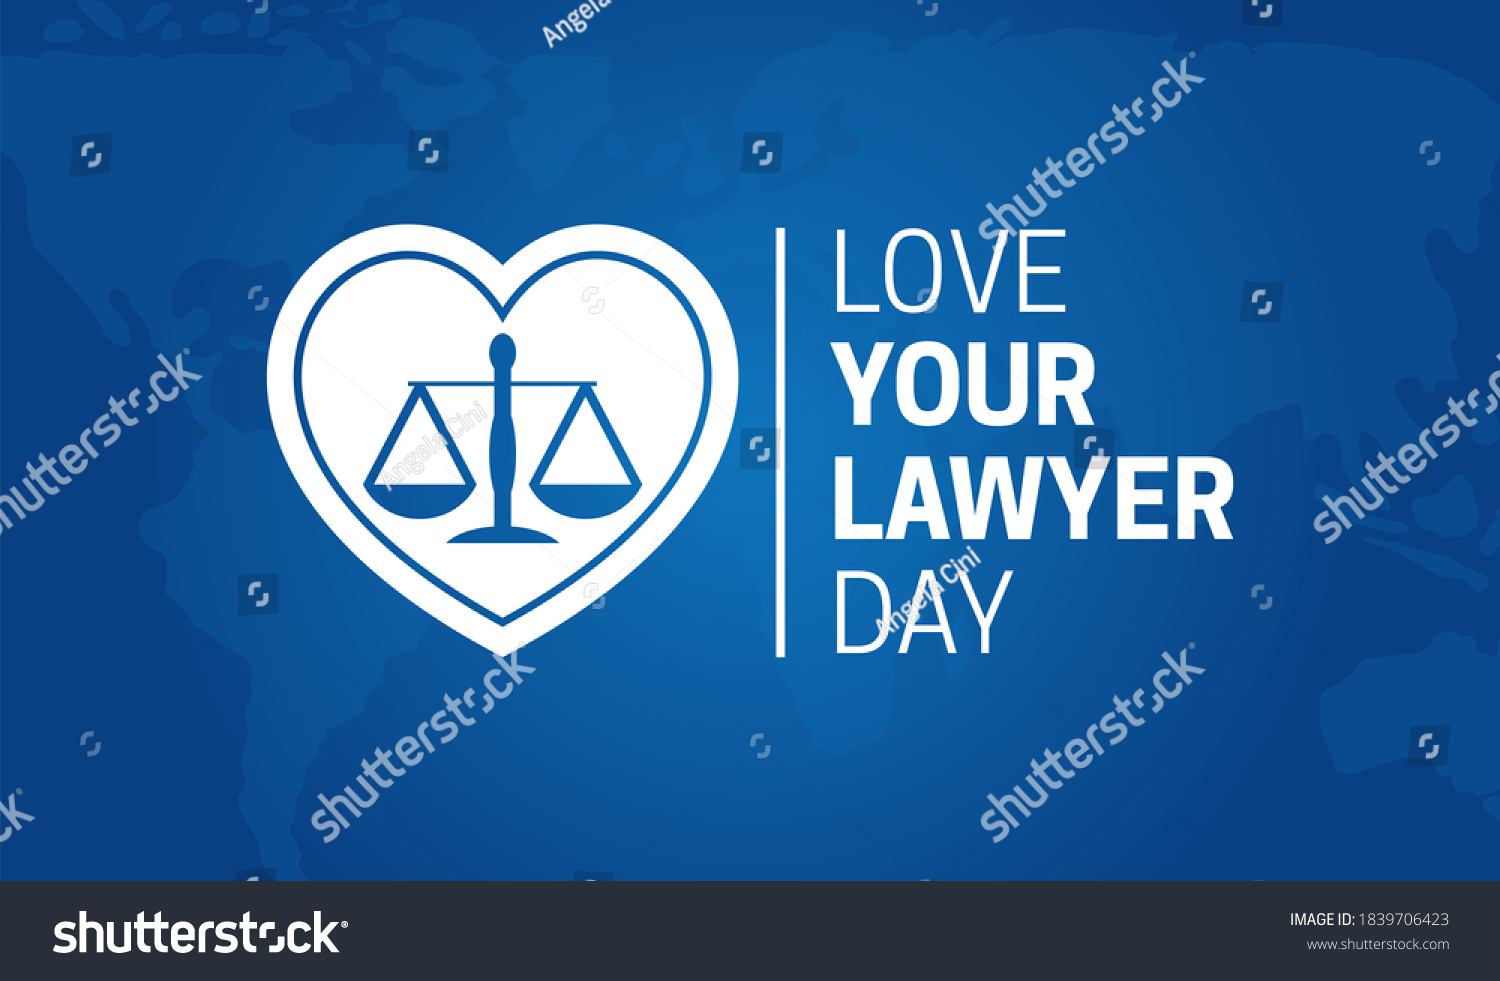 19 Love Your Lawyer Day Images, Stock Photos & Vectors Shutterstock